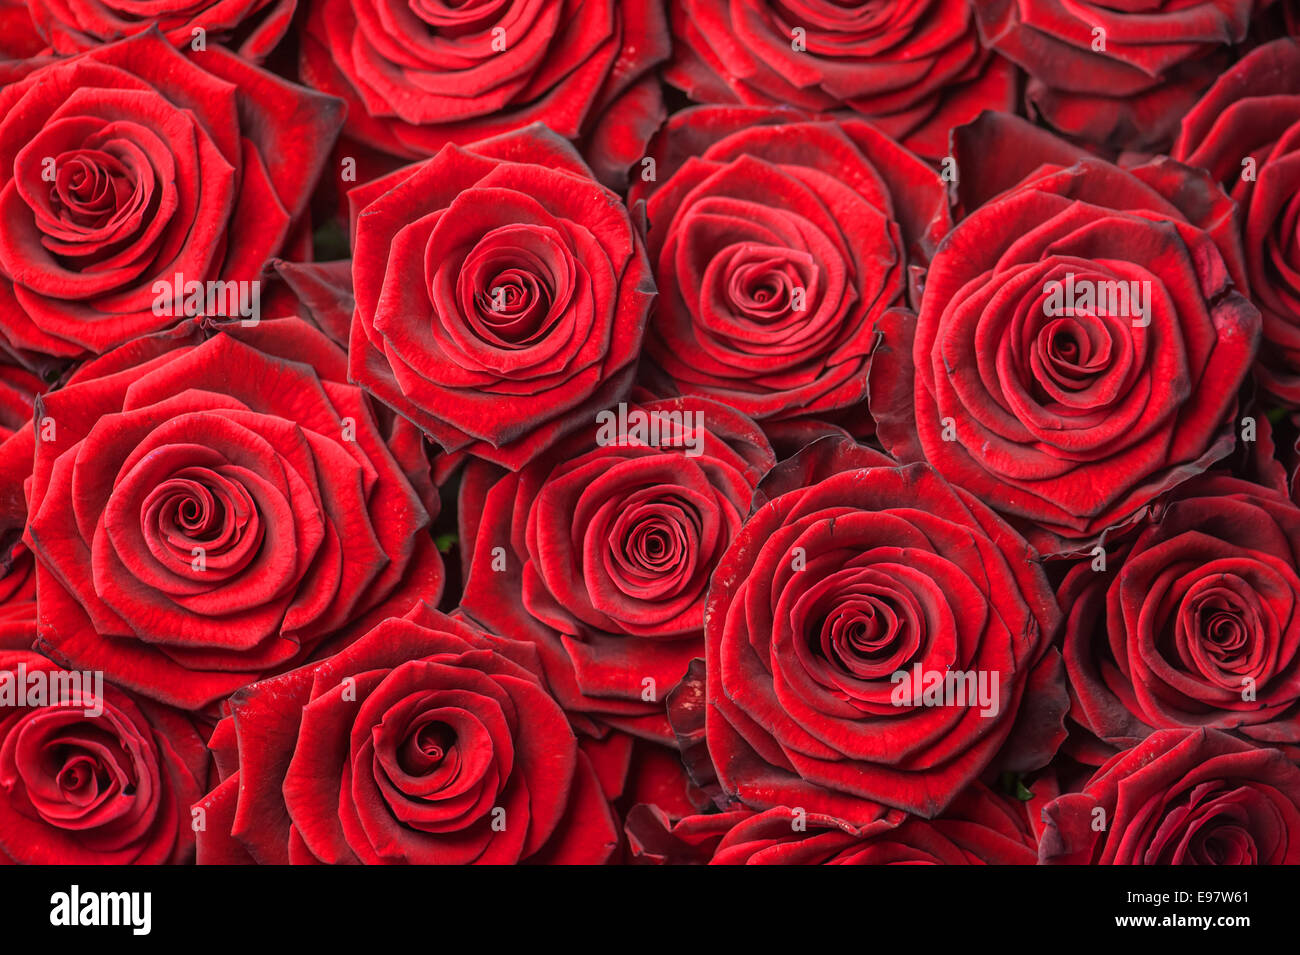 red rose pattern close up Stock Photo